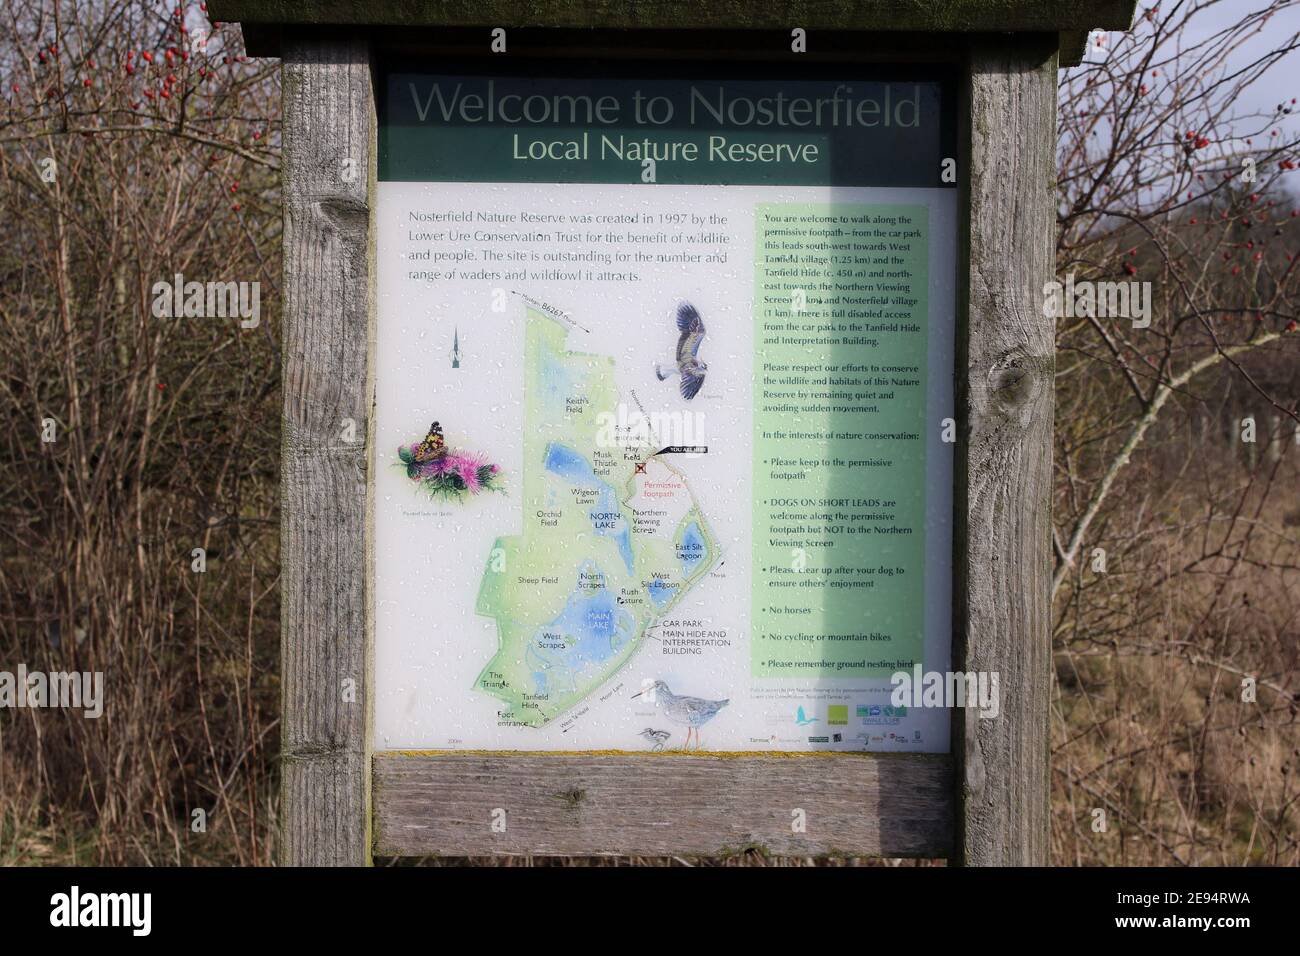 Notice board showing information and map of Nosterfield nature reserve, owned and managed by the Lower Ure Conservation Trust. North Yorkshire, UK Stock Photo